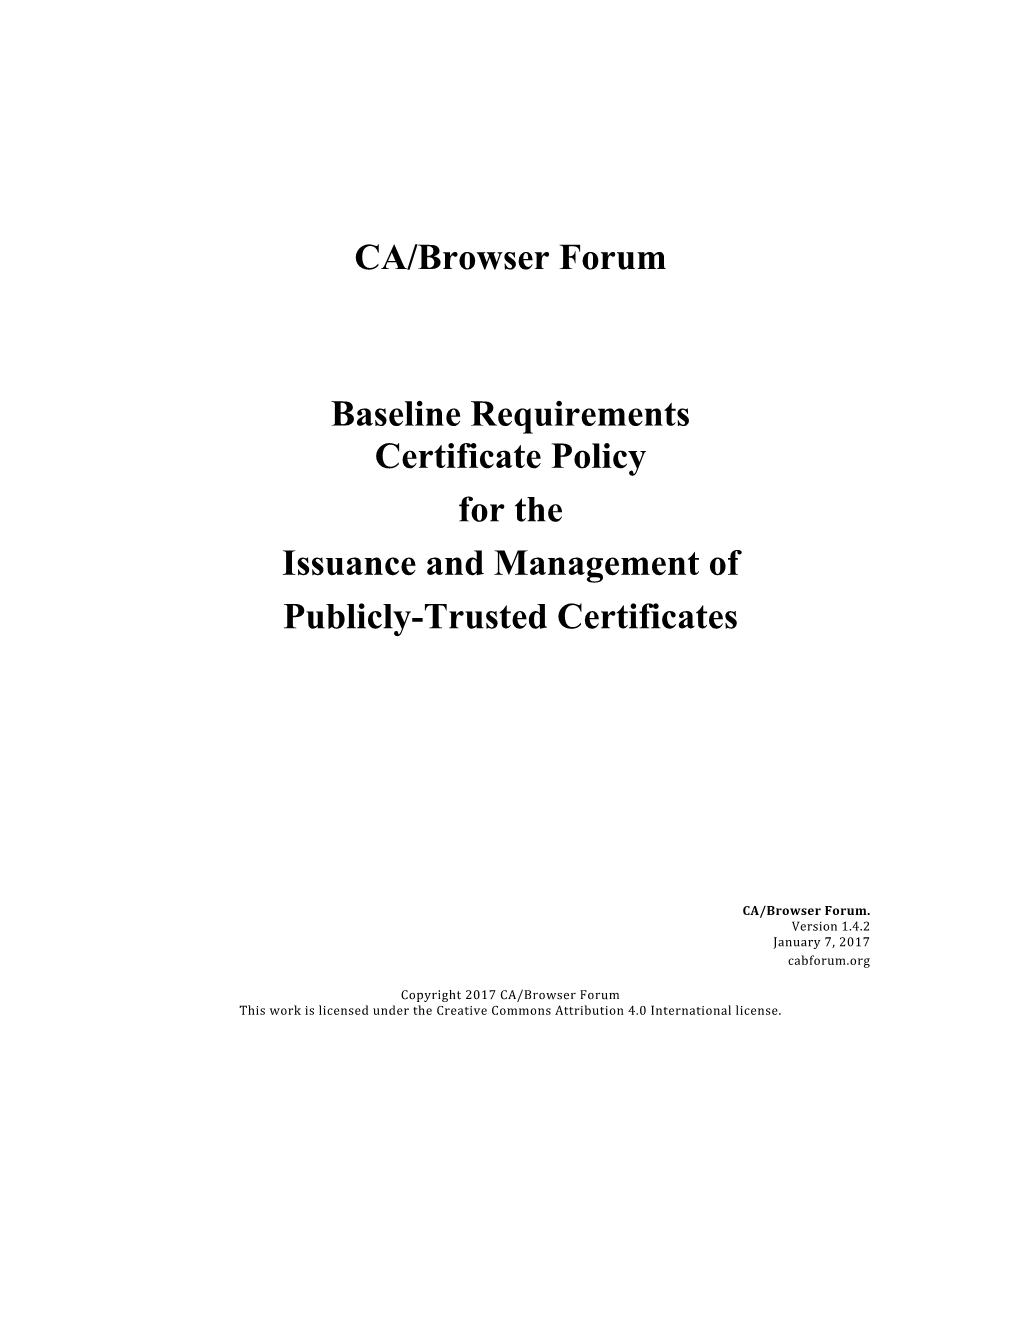 CA-Browser Forum Baseline Requirements Certificate Policy for SSL/TLS V. 1.4.2